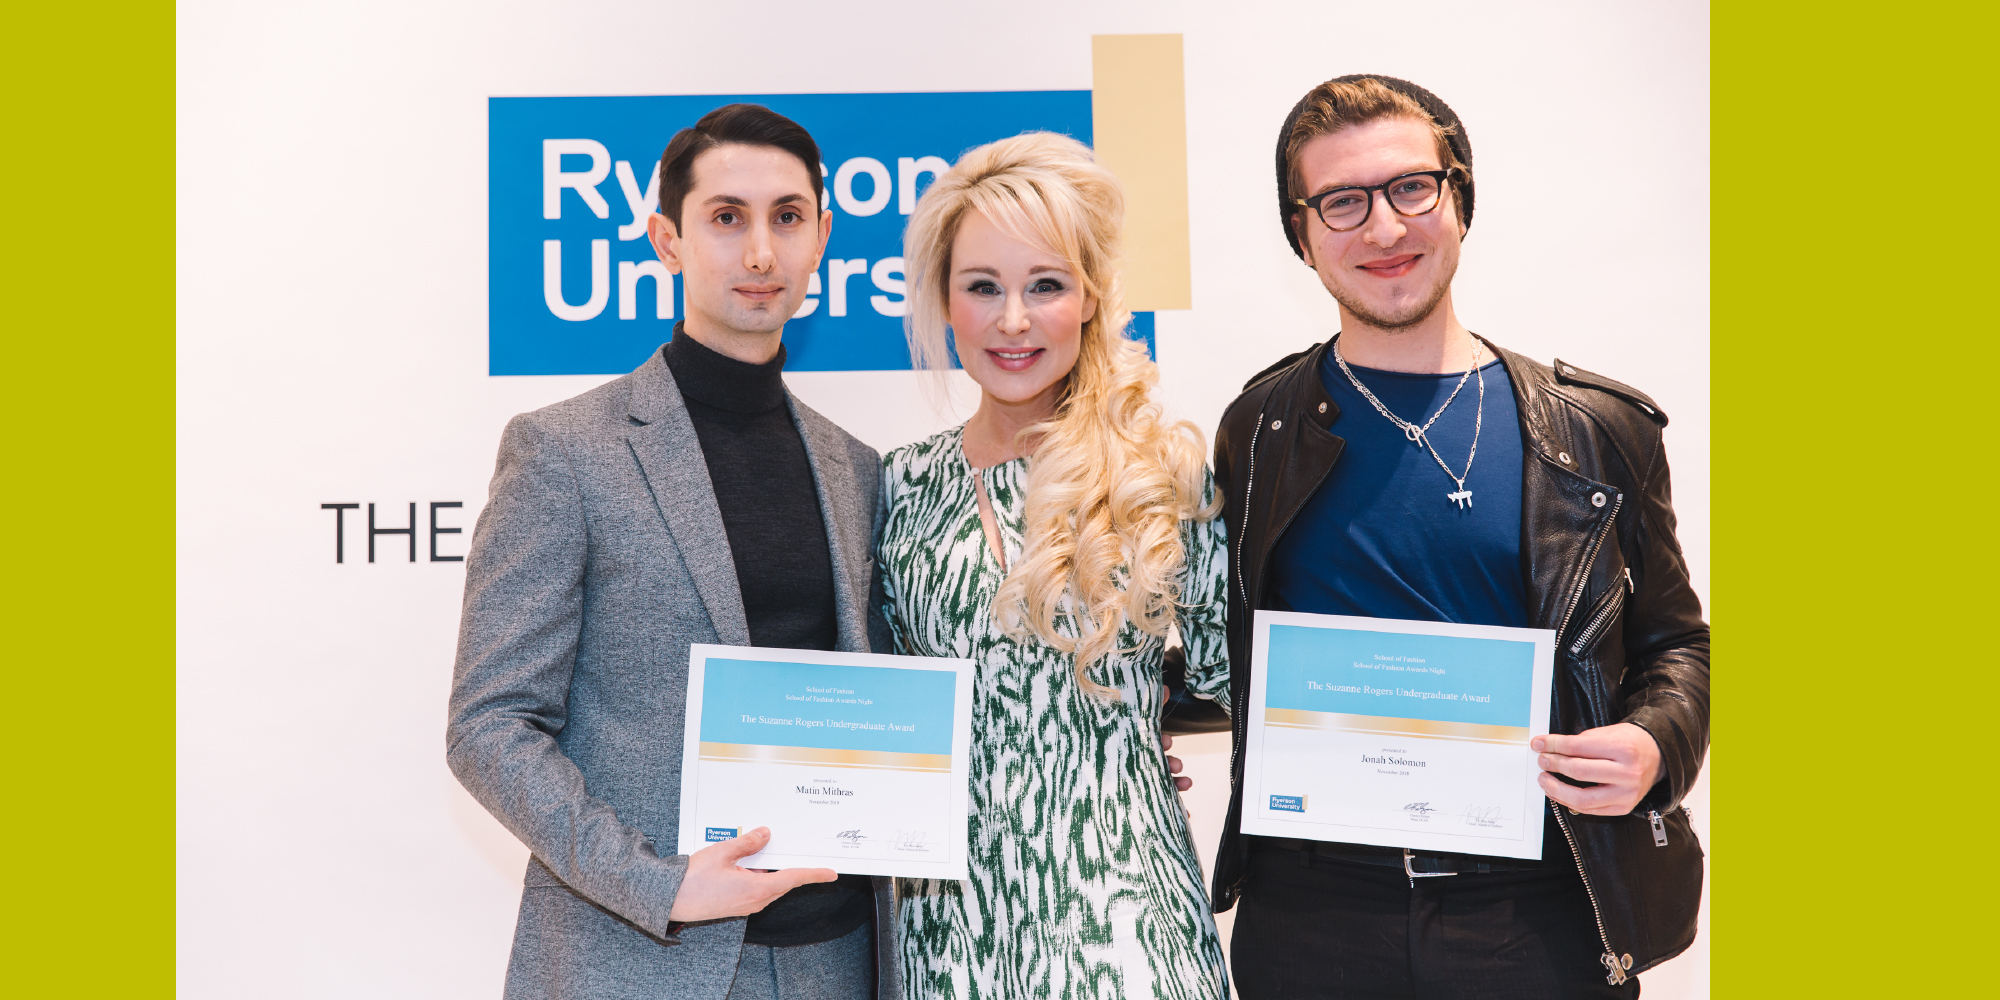 The Suzanne Rogers Fashion Institute Fellows: Matin Mithras and Jonah Solomon standing with Suzanne Rogers after receiving the Suzanne Rogers Undergraduate Award at the Fashion Awards Night 2018